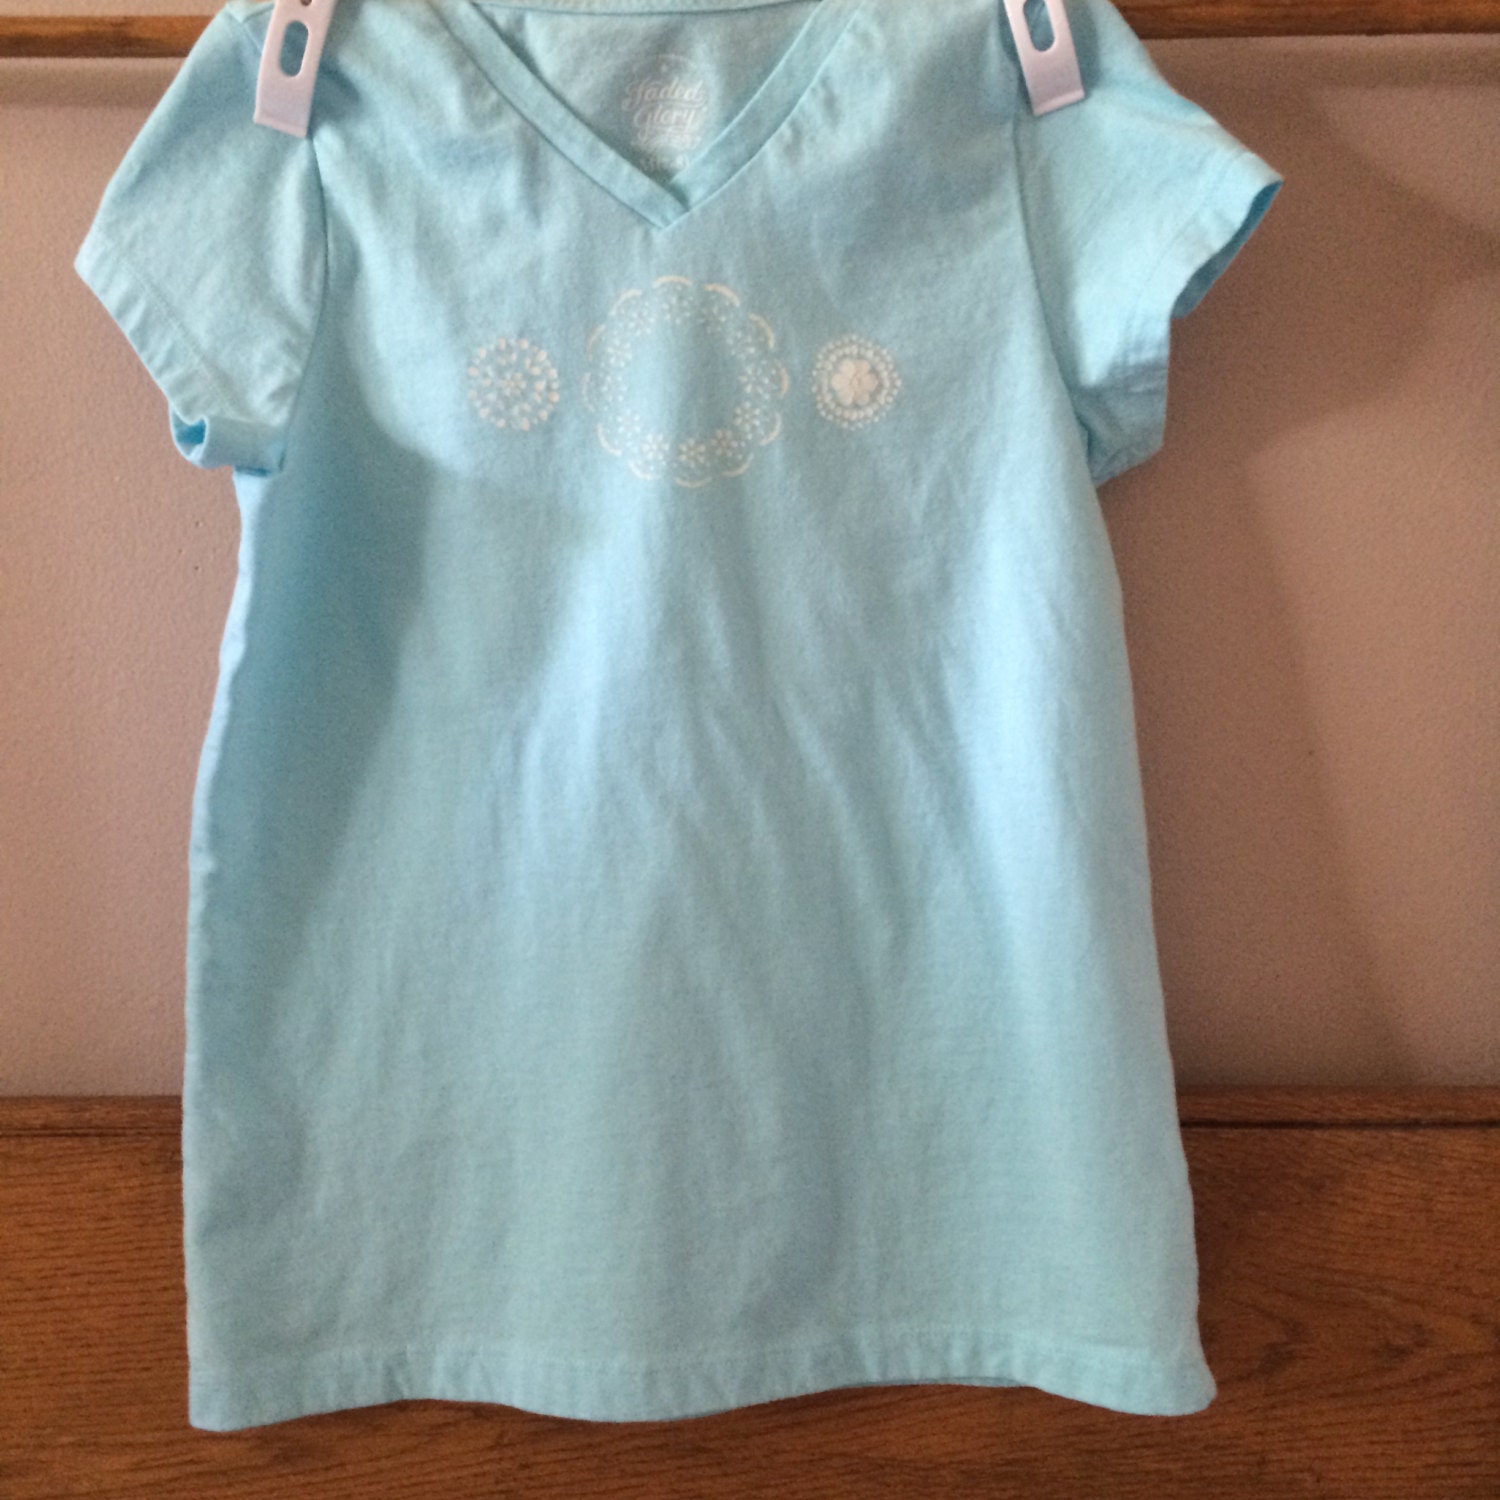 T-shirt beautiful shade of mint green with white design very